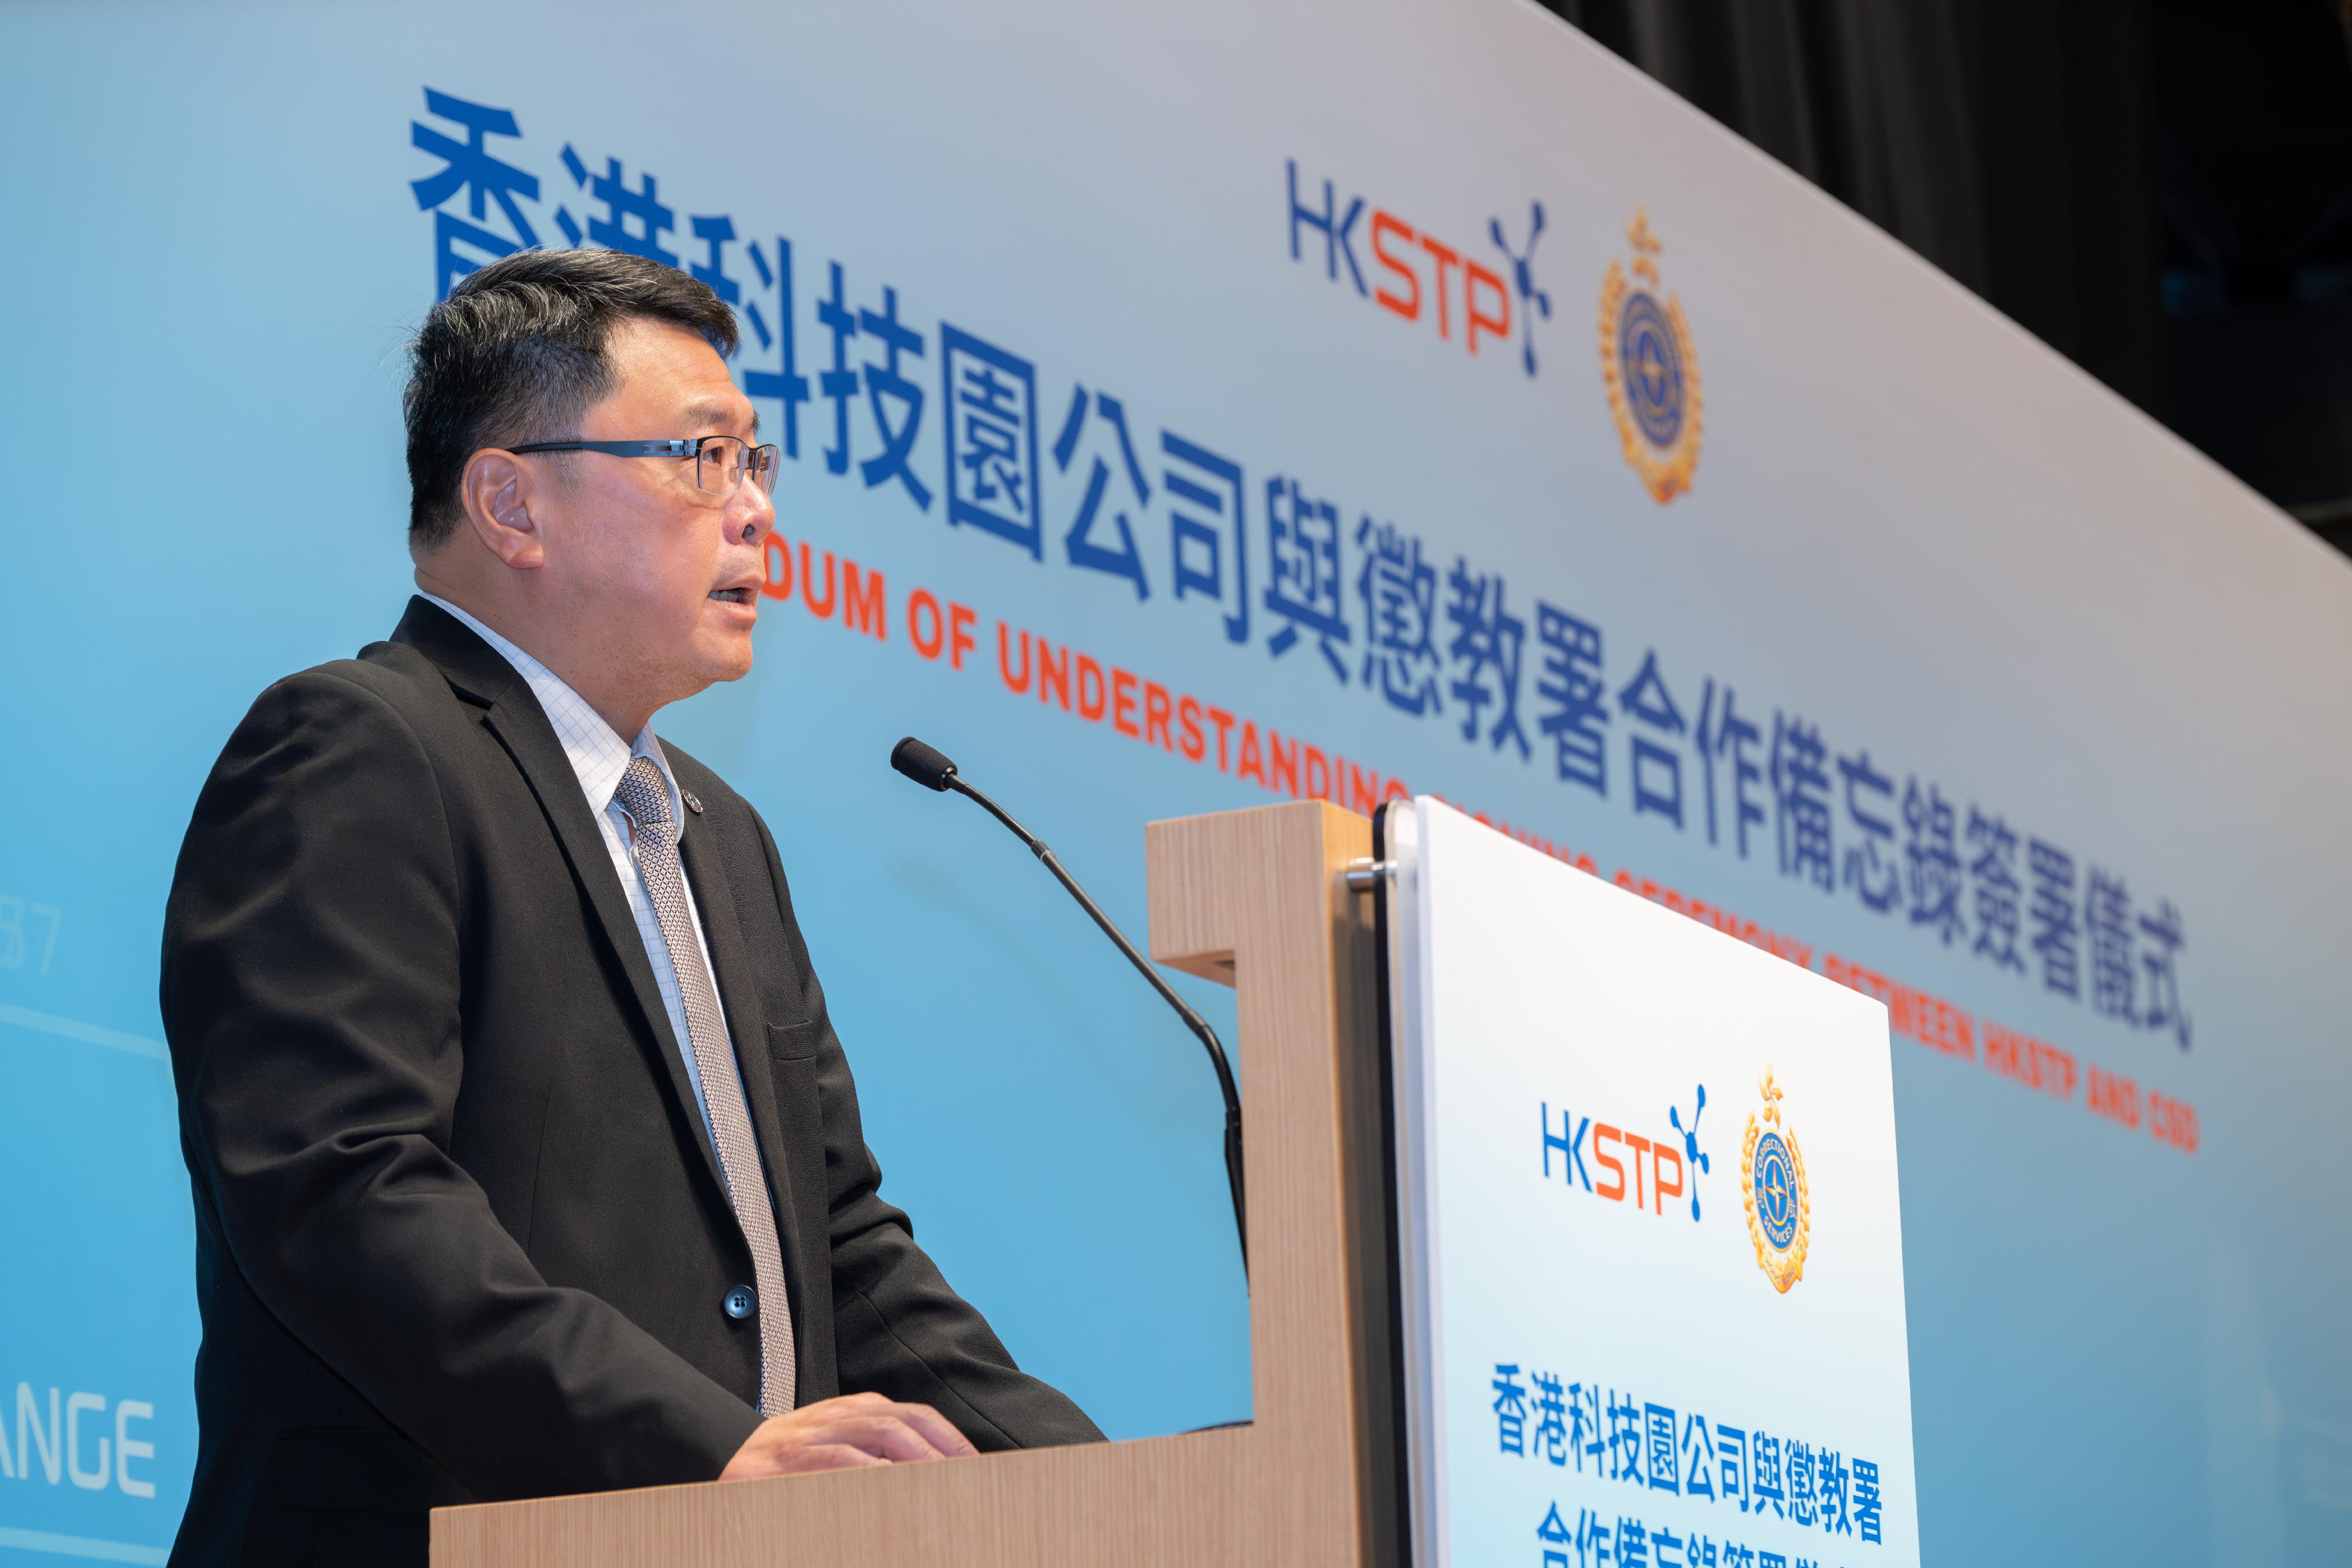 The Correctional Services Department and the Hong Kong Science and Technology Parks Corporation (HKSTP) signed a Memorandum of Understanding today (July 11) to deepen their co-operation, which will inject new impetus into the sustainable development of "Smart Prison". Photo shows the Chairman of the HKSTP, Dr Sunny Chai, delivering a speech at the signing ceremony.